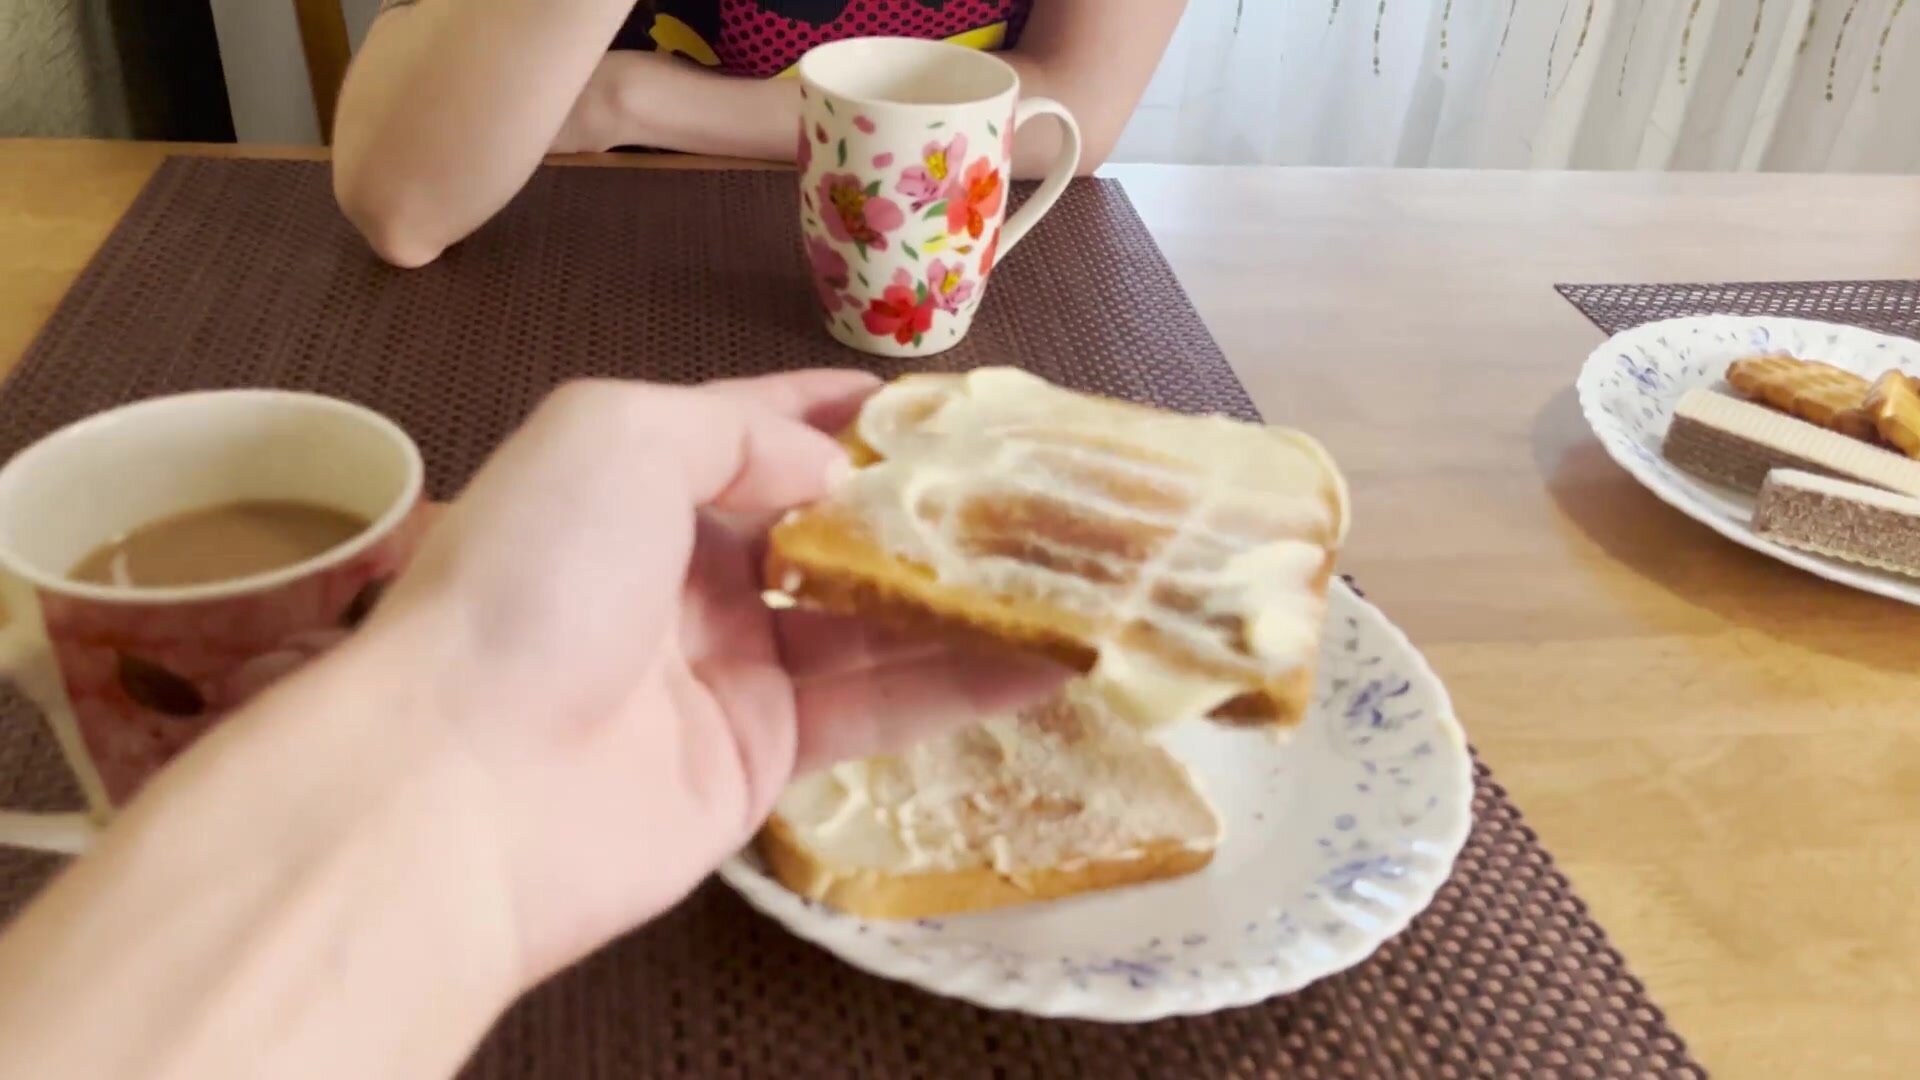 PollyDollie - I had breakfast with my stepbrother's dick while my Dad doesn't see